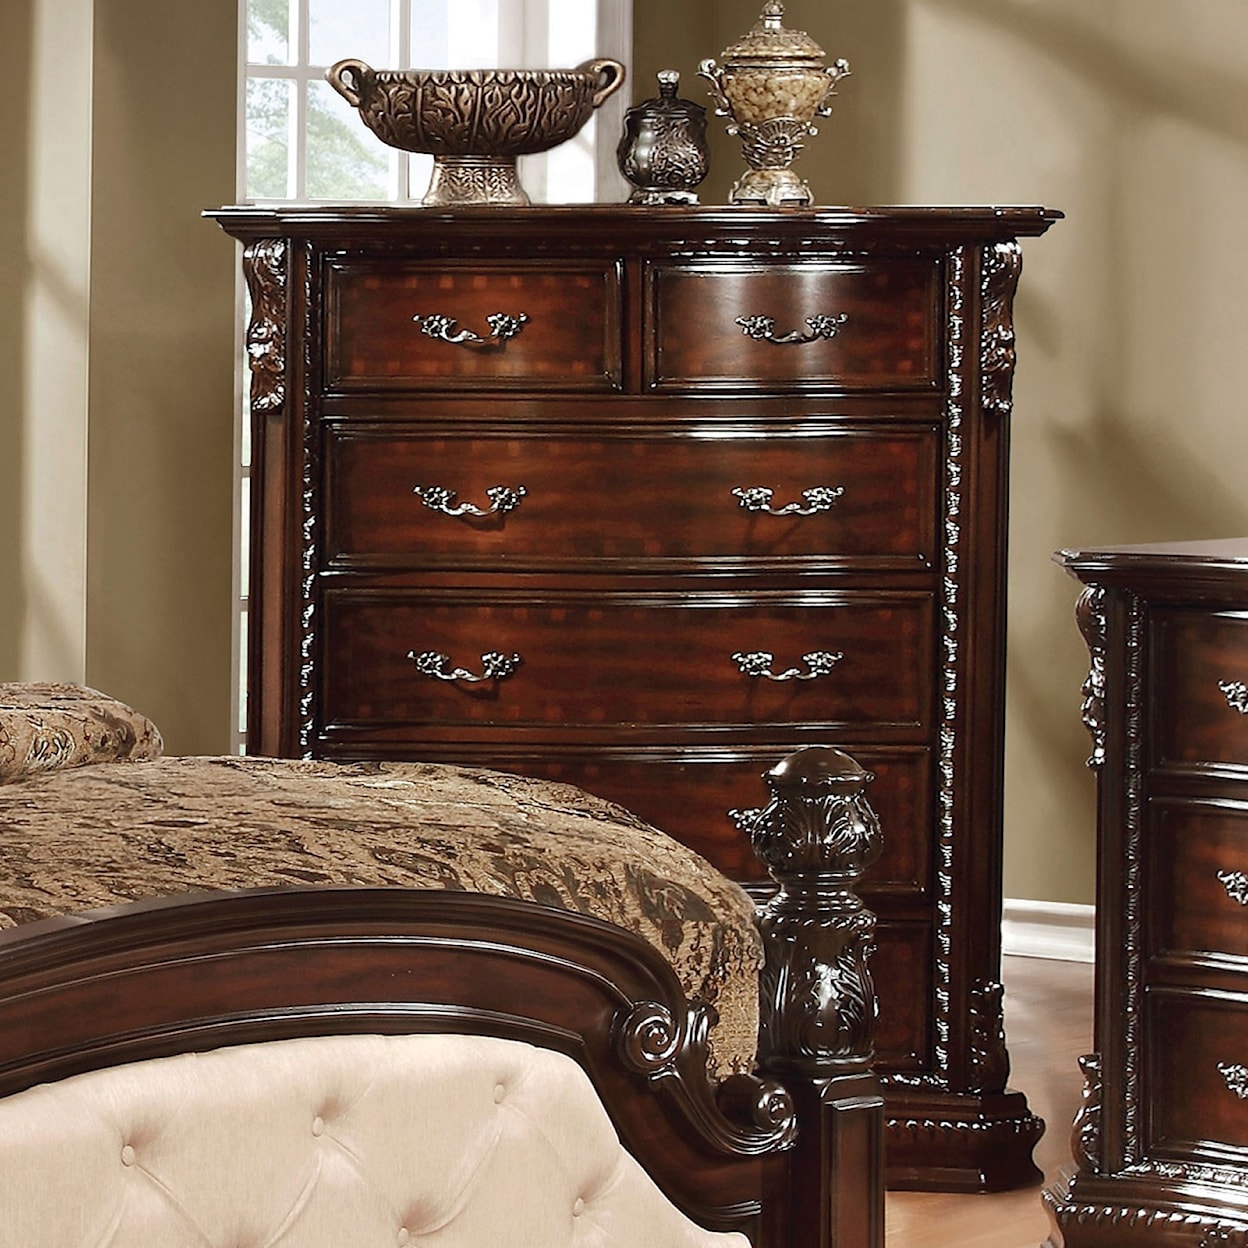 Furniture of America Monte Vista I Chest of Drawers